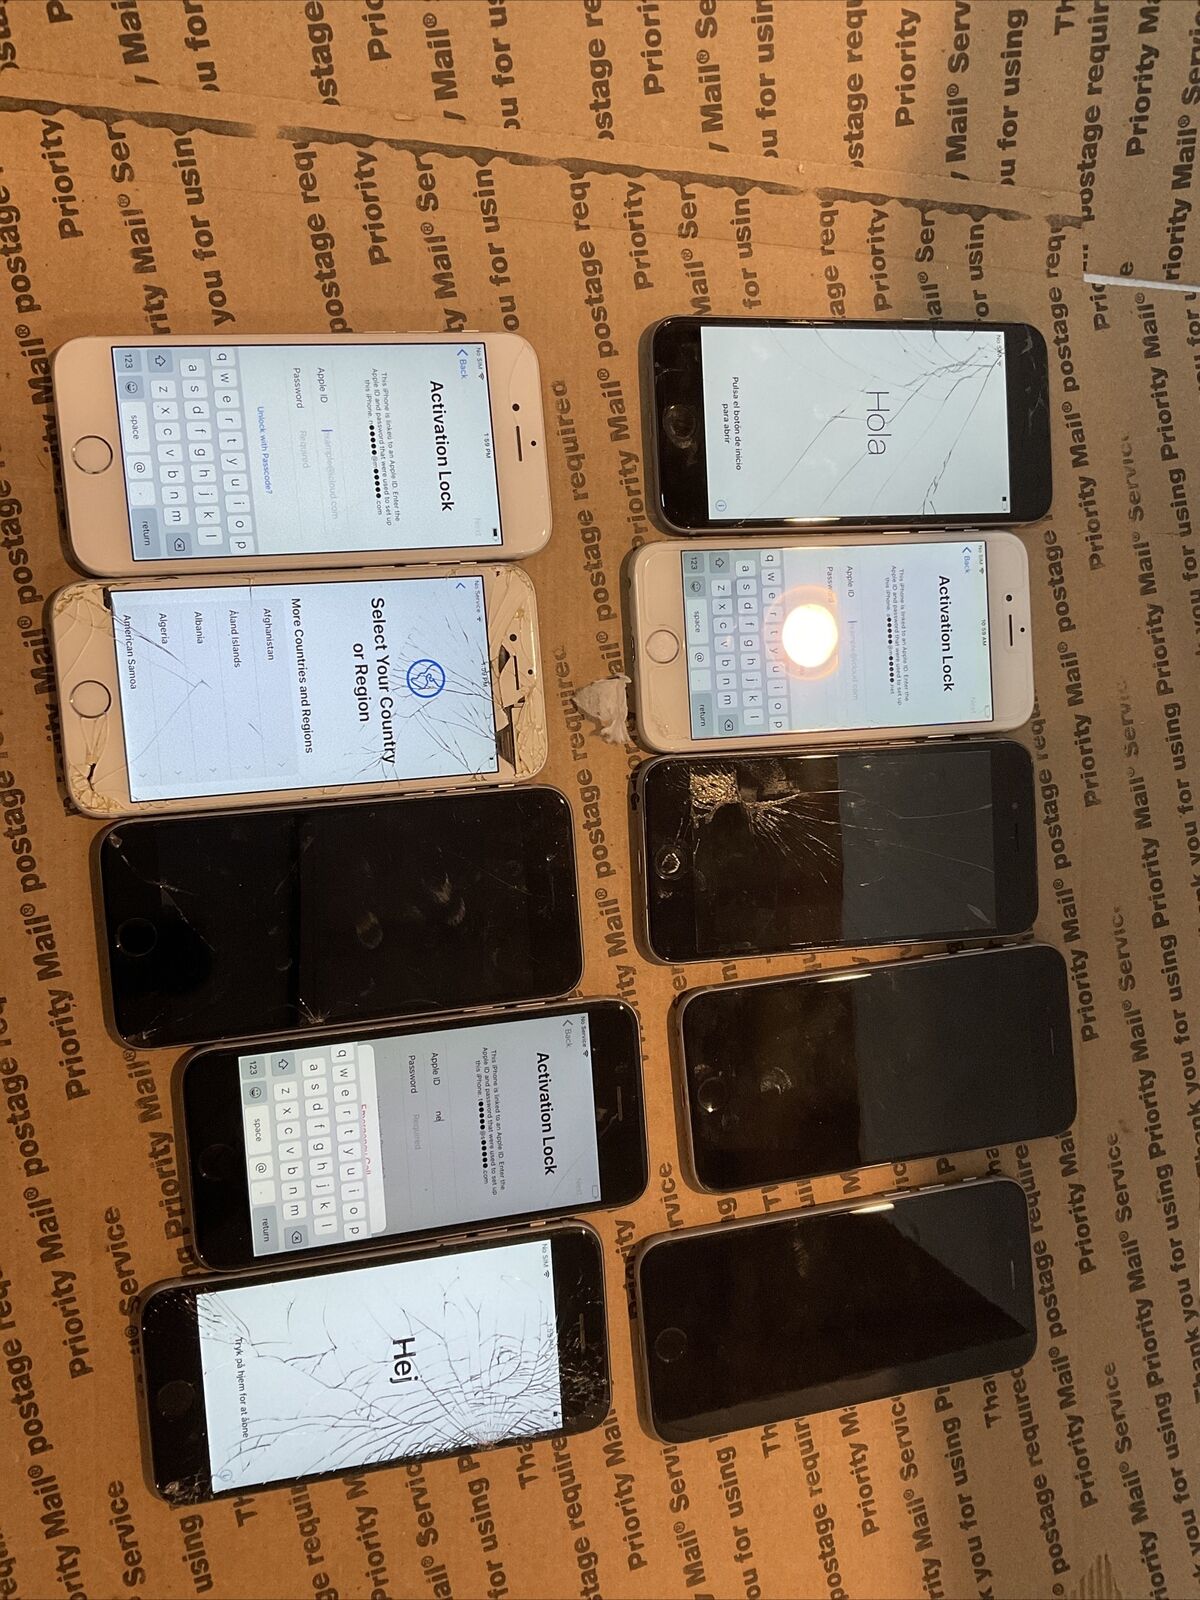 Lot of 10 Apple iPhone 6 6s 16 32 gb As-Is, Parts Not Working Read